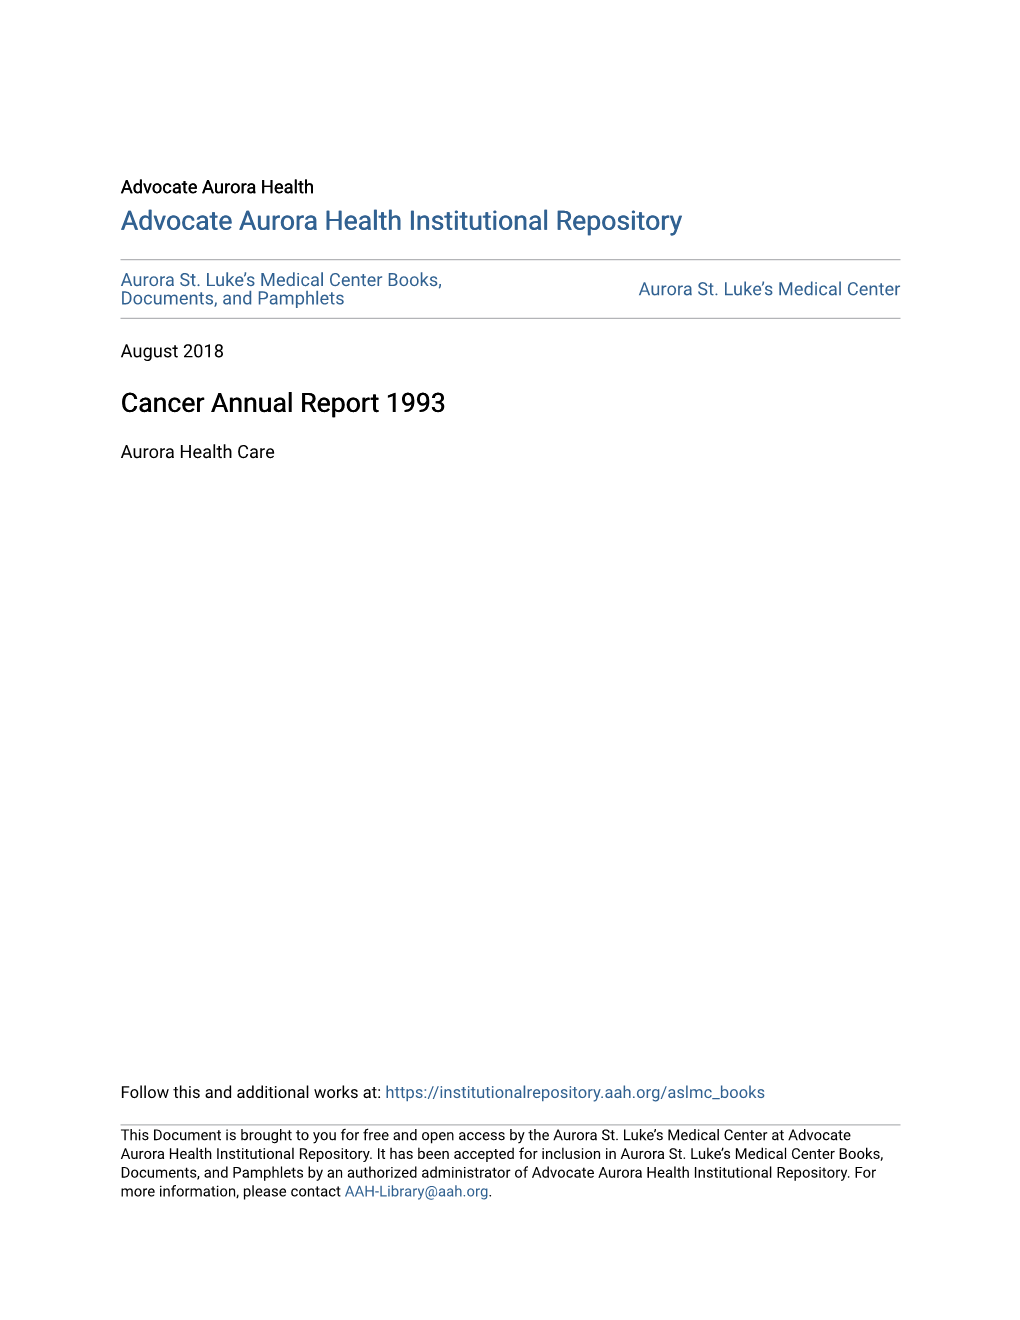 Cancer Annual Report 1993